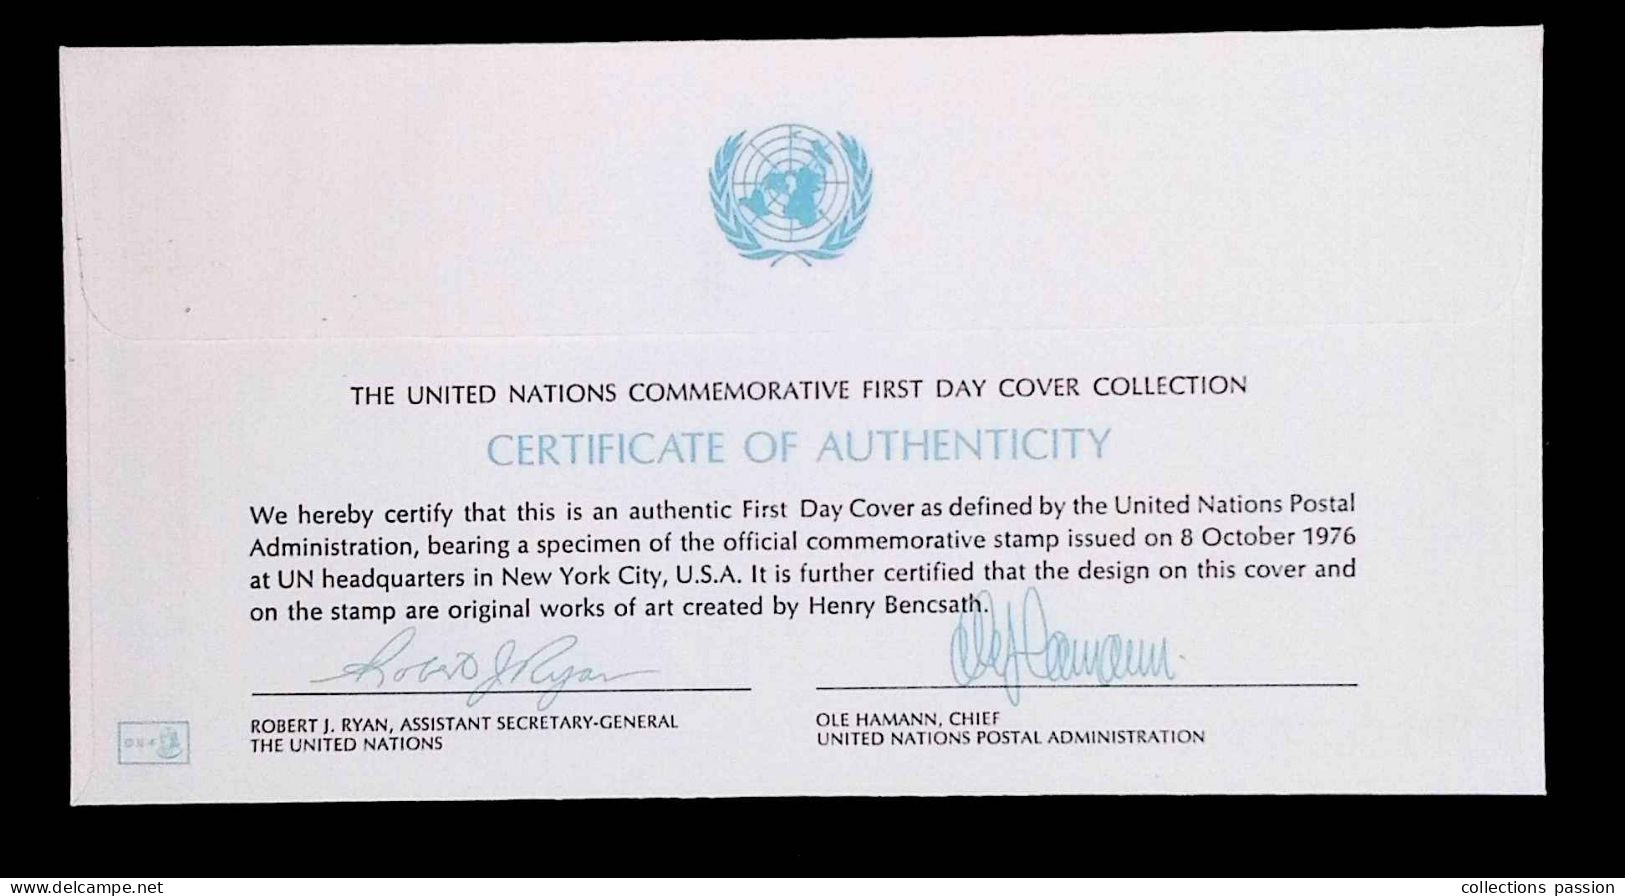 CL, FDC, 1 Er Jour, United Nations, New York, Oct. 8 1976, 25 Th Anniversary U.N. Postal Administration, 2 Scans - Lettres & Documents